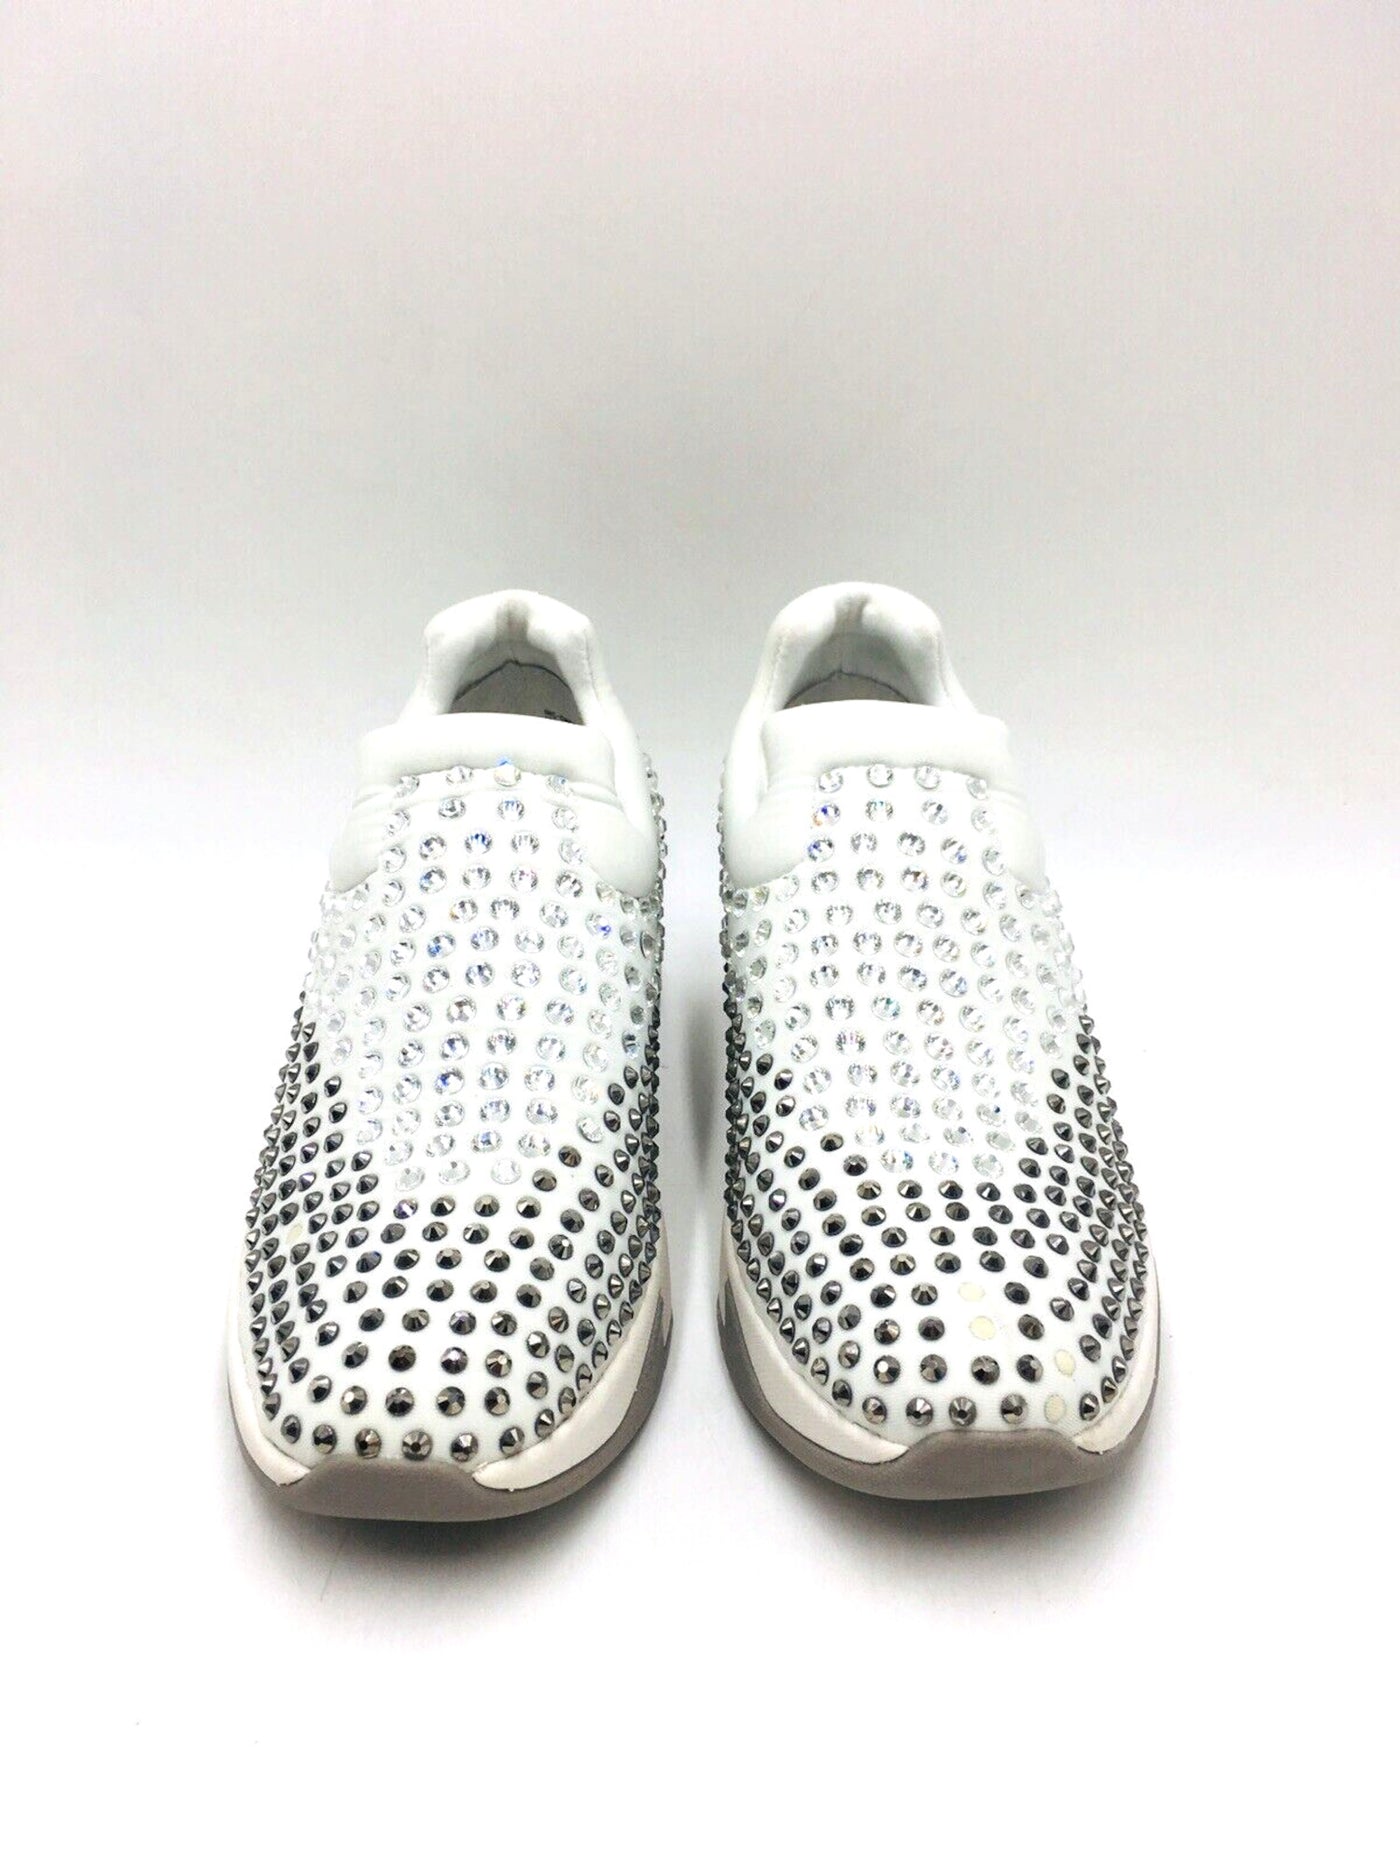 INC Womens White Rhinestone Removable Insole Oneena Round Toe Wedge Slip On Athletic Sneakers Shoes 5.5 M